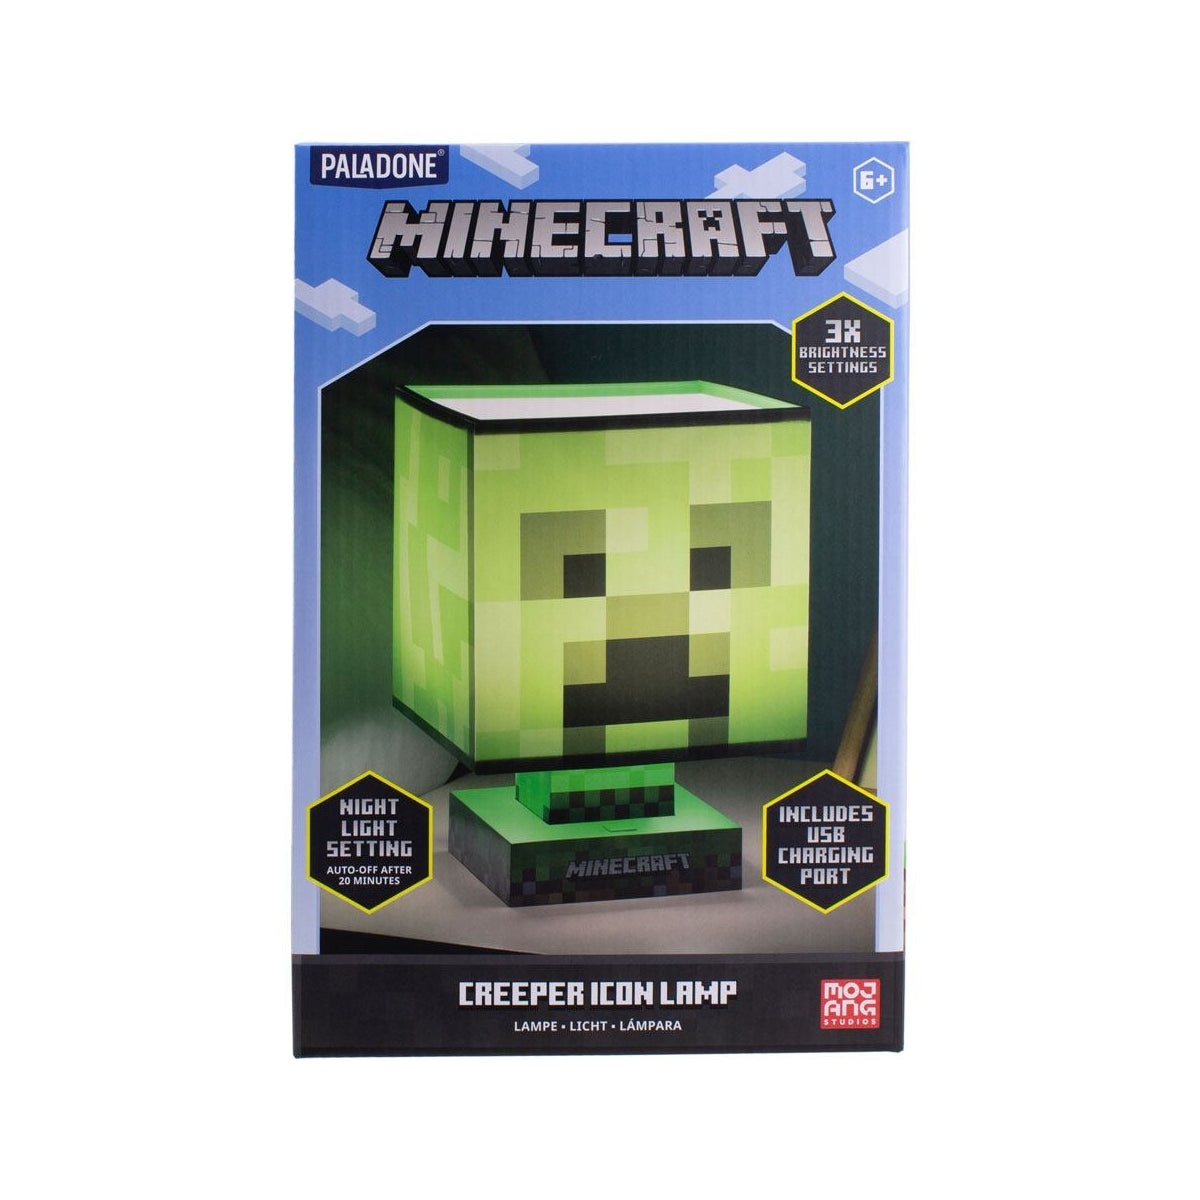 Lampe Minecraft - Creeper Lamp avec chargeur USB